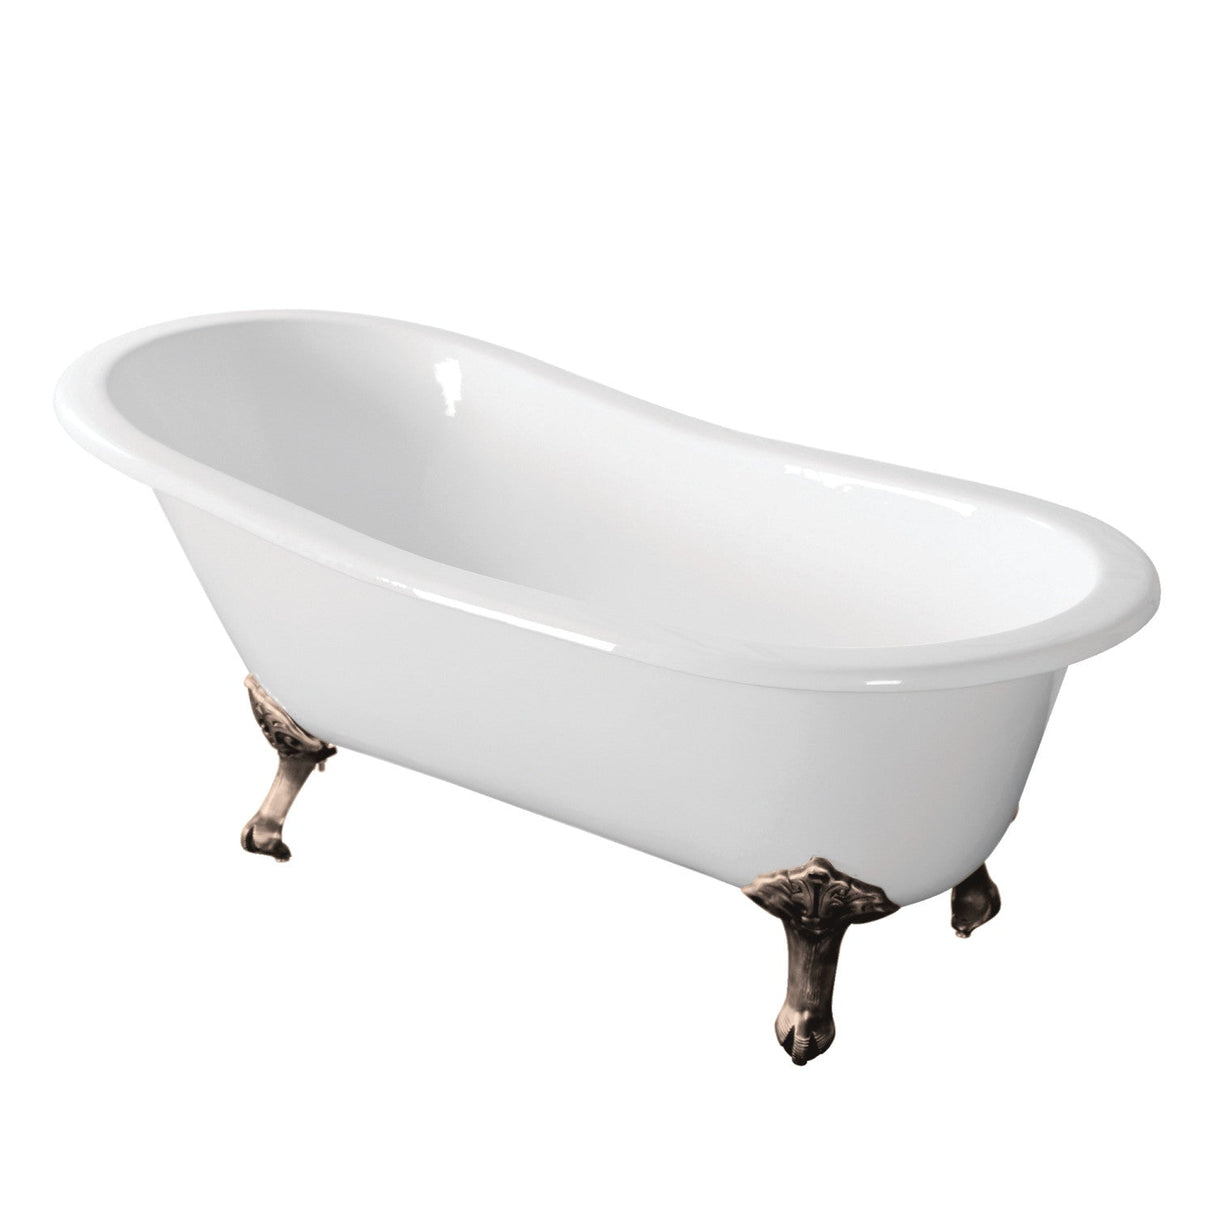 Aqua Eden VCTND673122ZB8 67-Inch Cast Iron Single Slipper Clawfoot Tub (No Faucet Drillings), White/Brushed Nickel